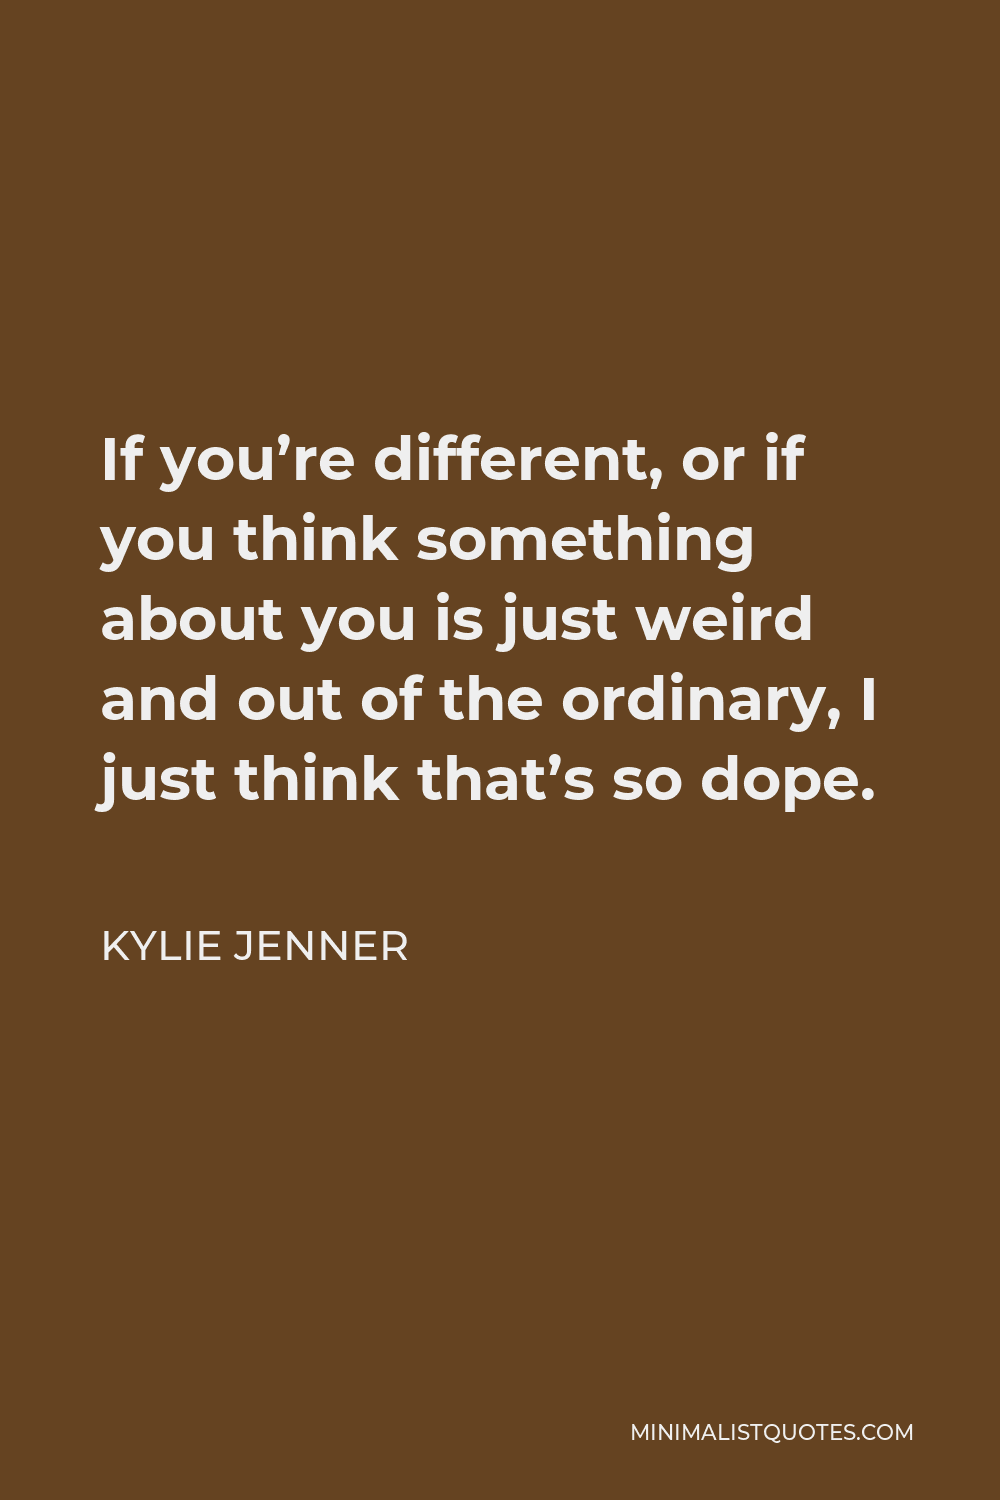 Kylie Jenner Quote - If you’re different, or if you think something about you is just weird and out of the ordinary, I just think that’s so dope.